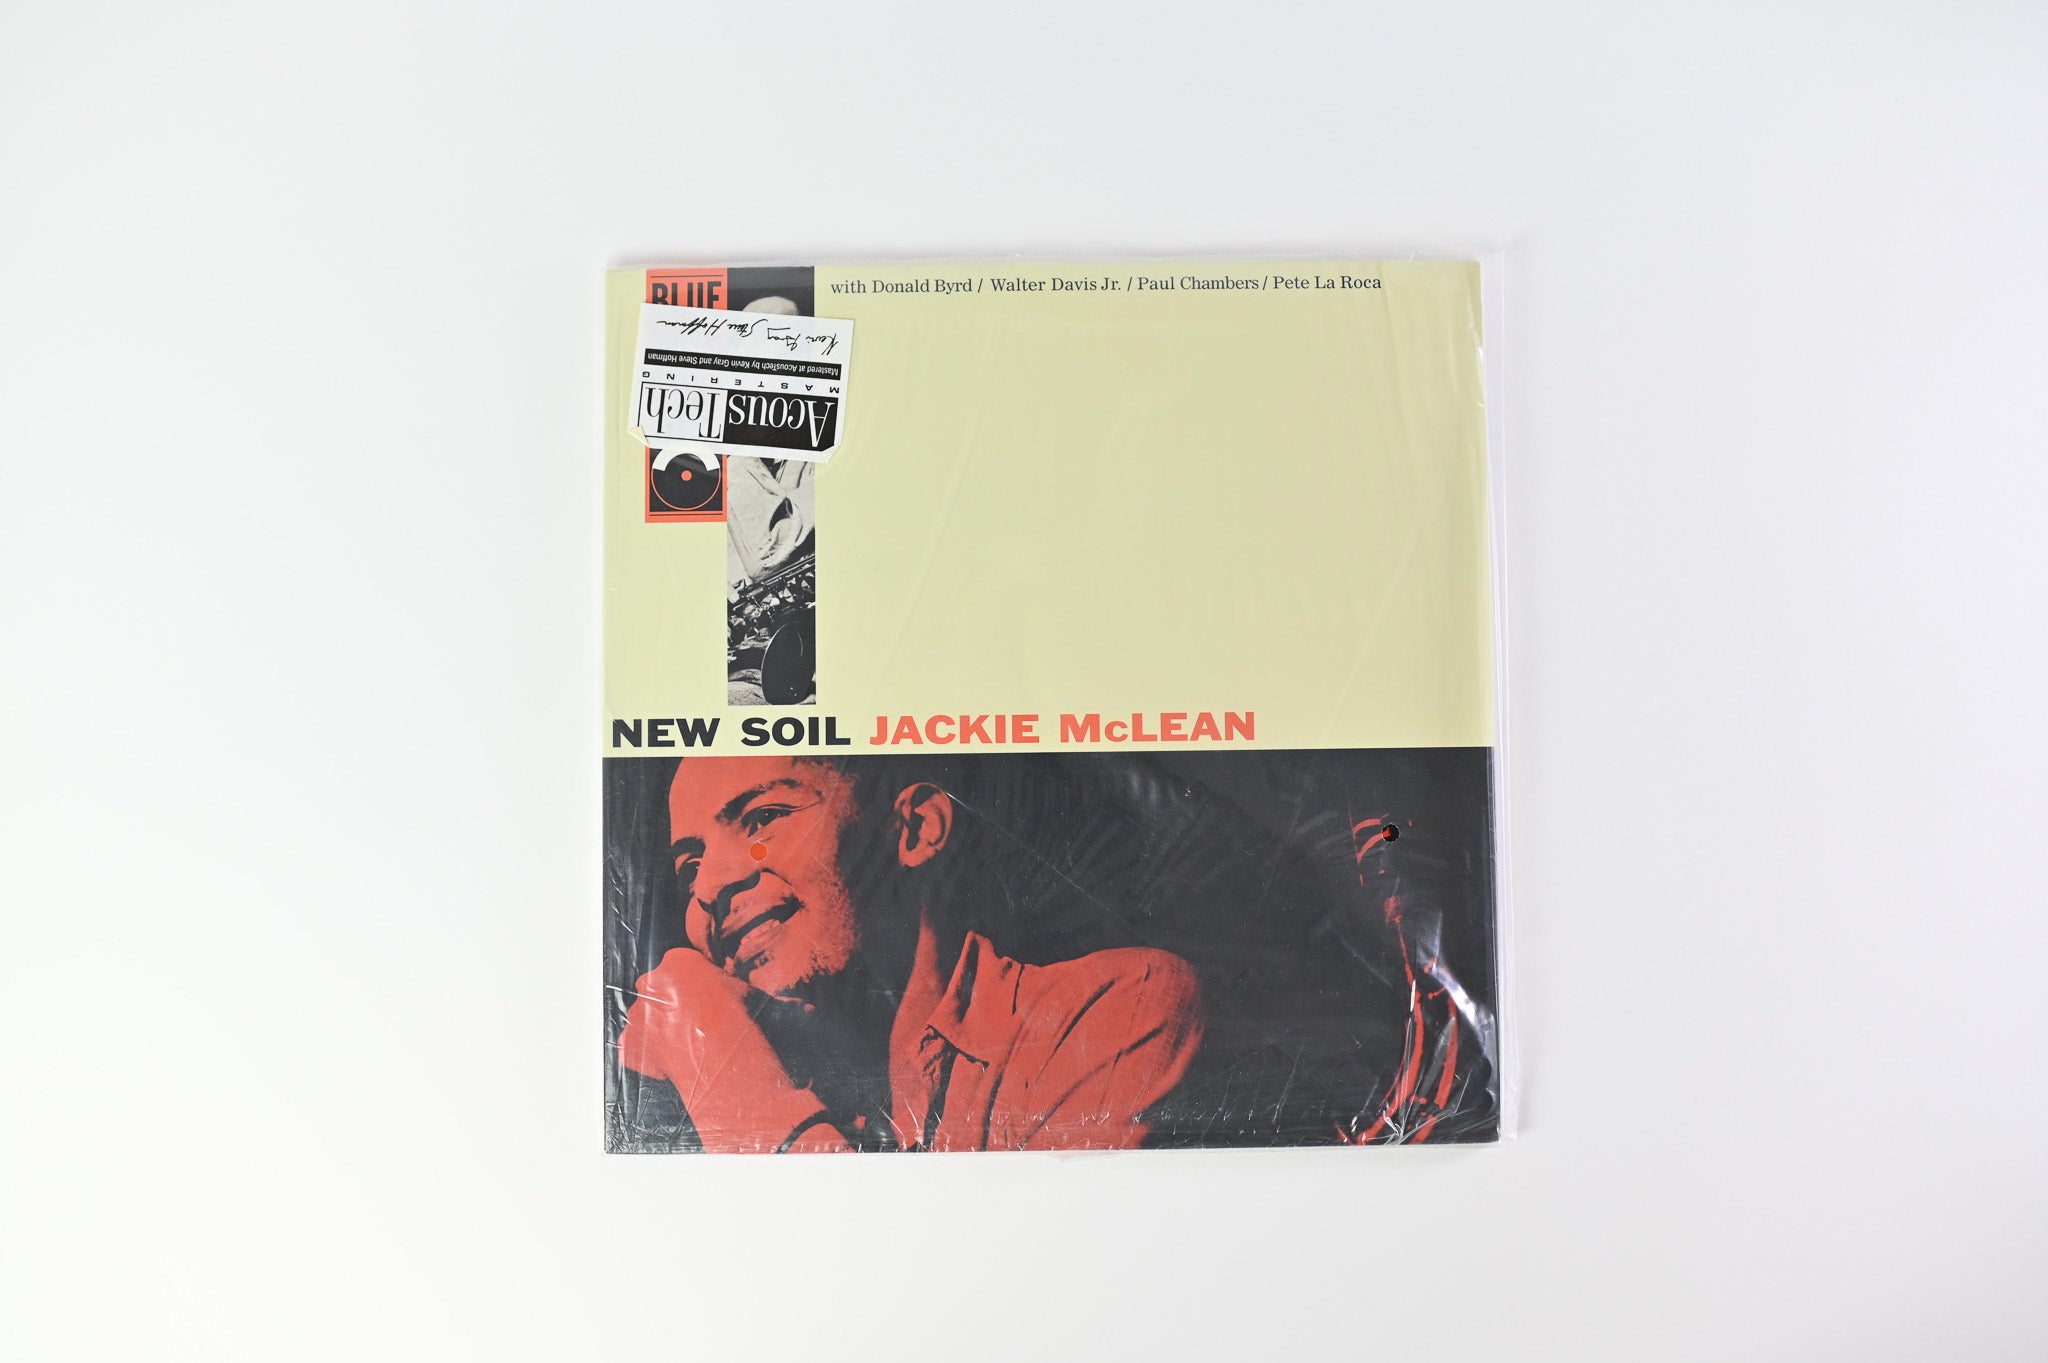 Jackie McLean - New Soil on Blue Note Analogue Productions Ltd 45 RPM Numbered Reissue